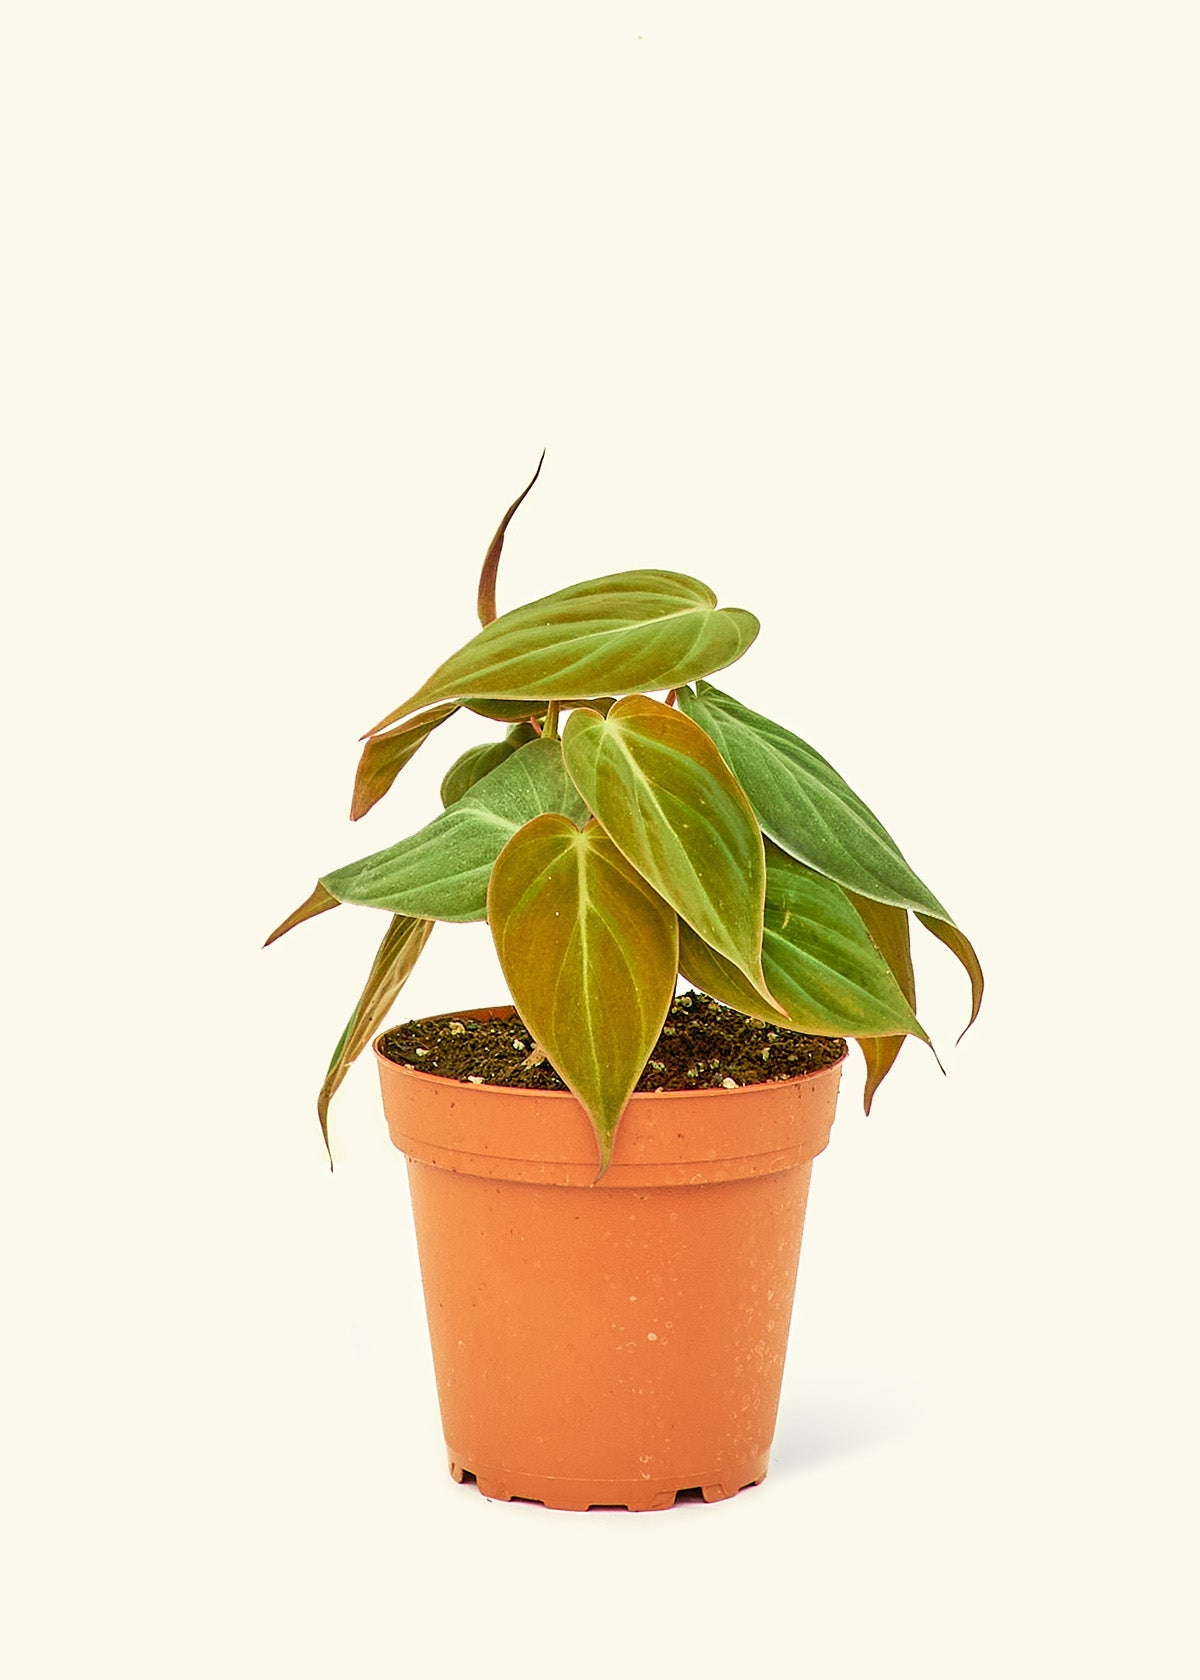 Small Velvet Leaf Philodendron (Philodendron micans) in a grow pot.